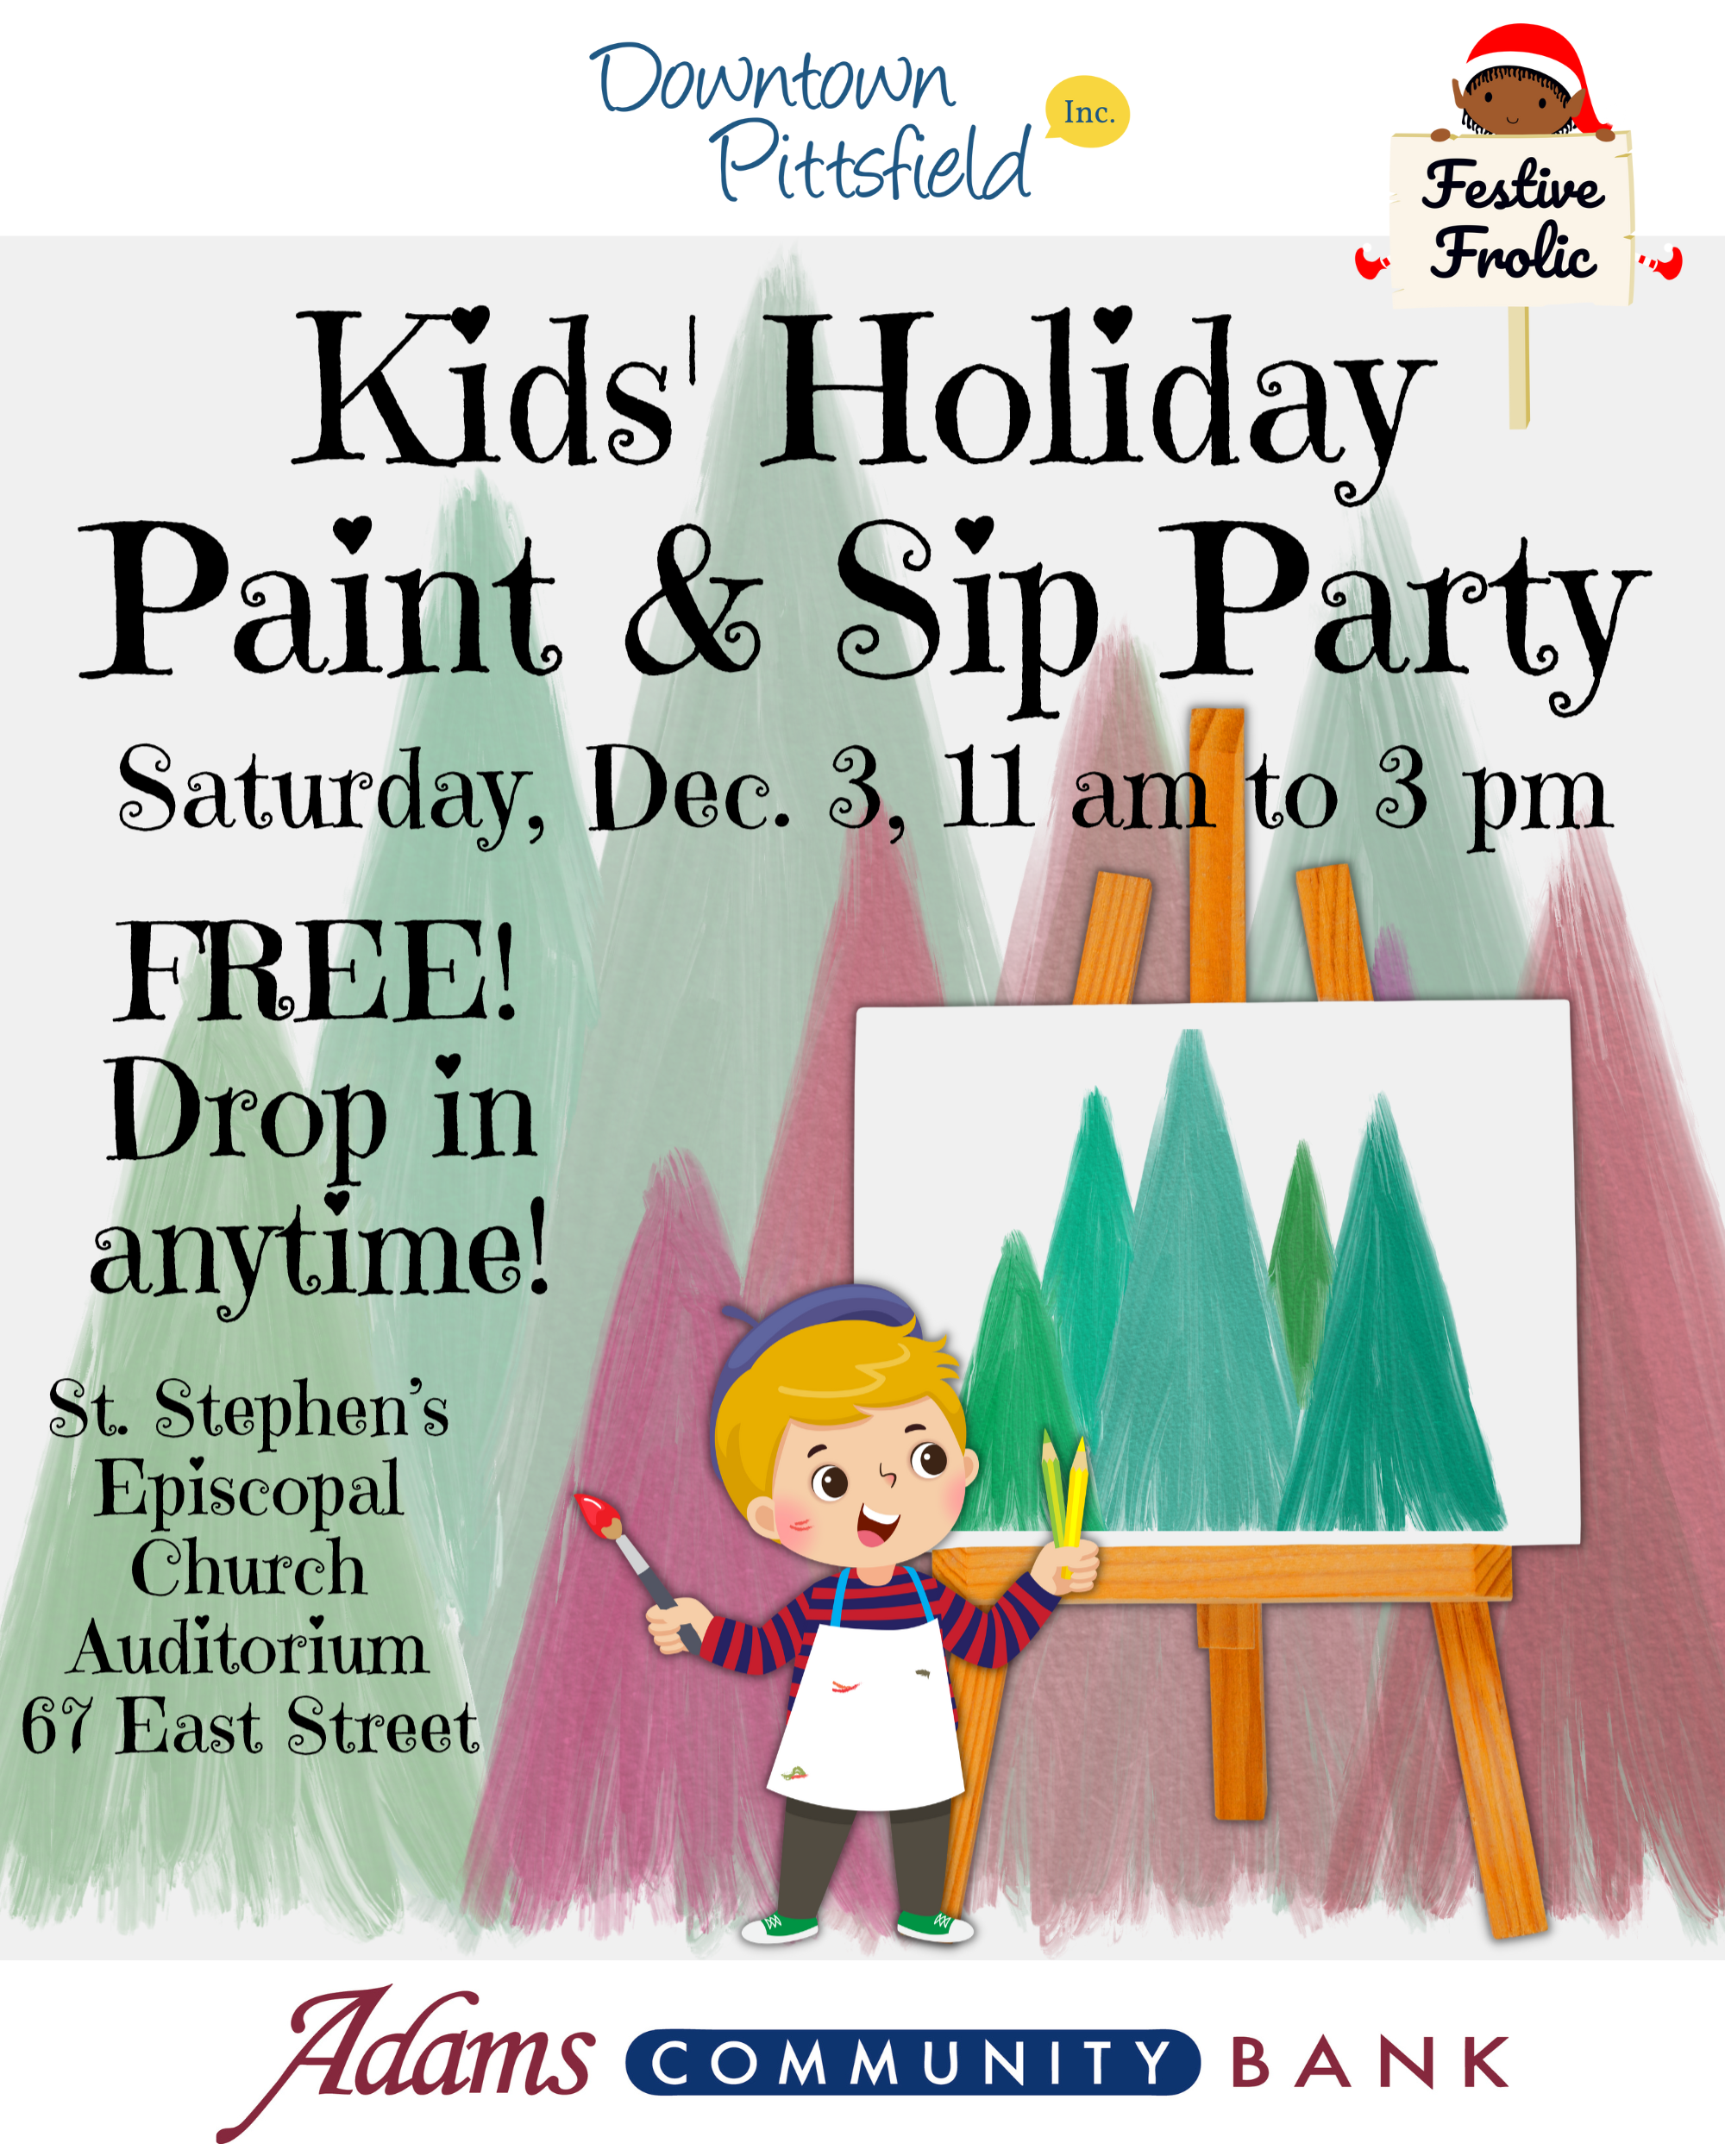 Free Holiday Kids’ Paint & Sip Party sponsored by Adams Community Bank